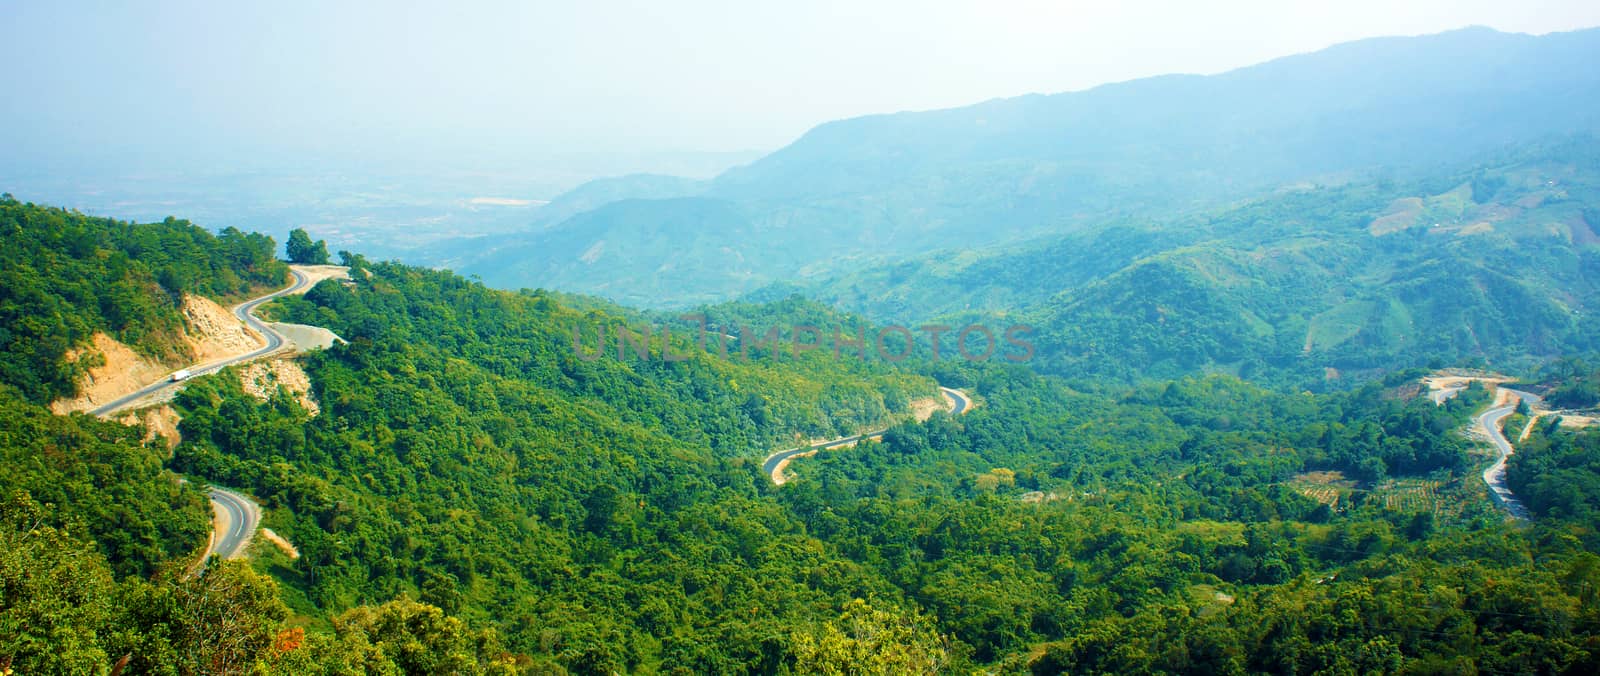 Wonderful scene of nature on day, row and row mountain, green forest, transportation on mountain pass, road connect Dalat, Phan Rang, it call Ngoan Muc mountain pass, zigzag, danger, nice for travel